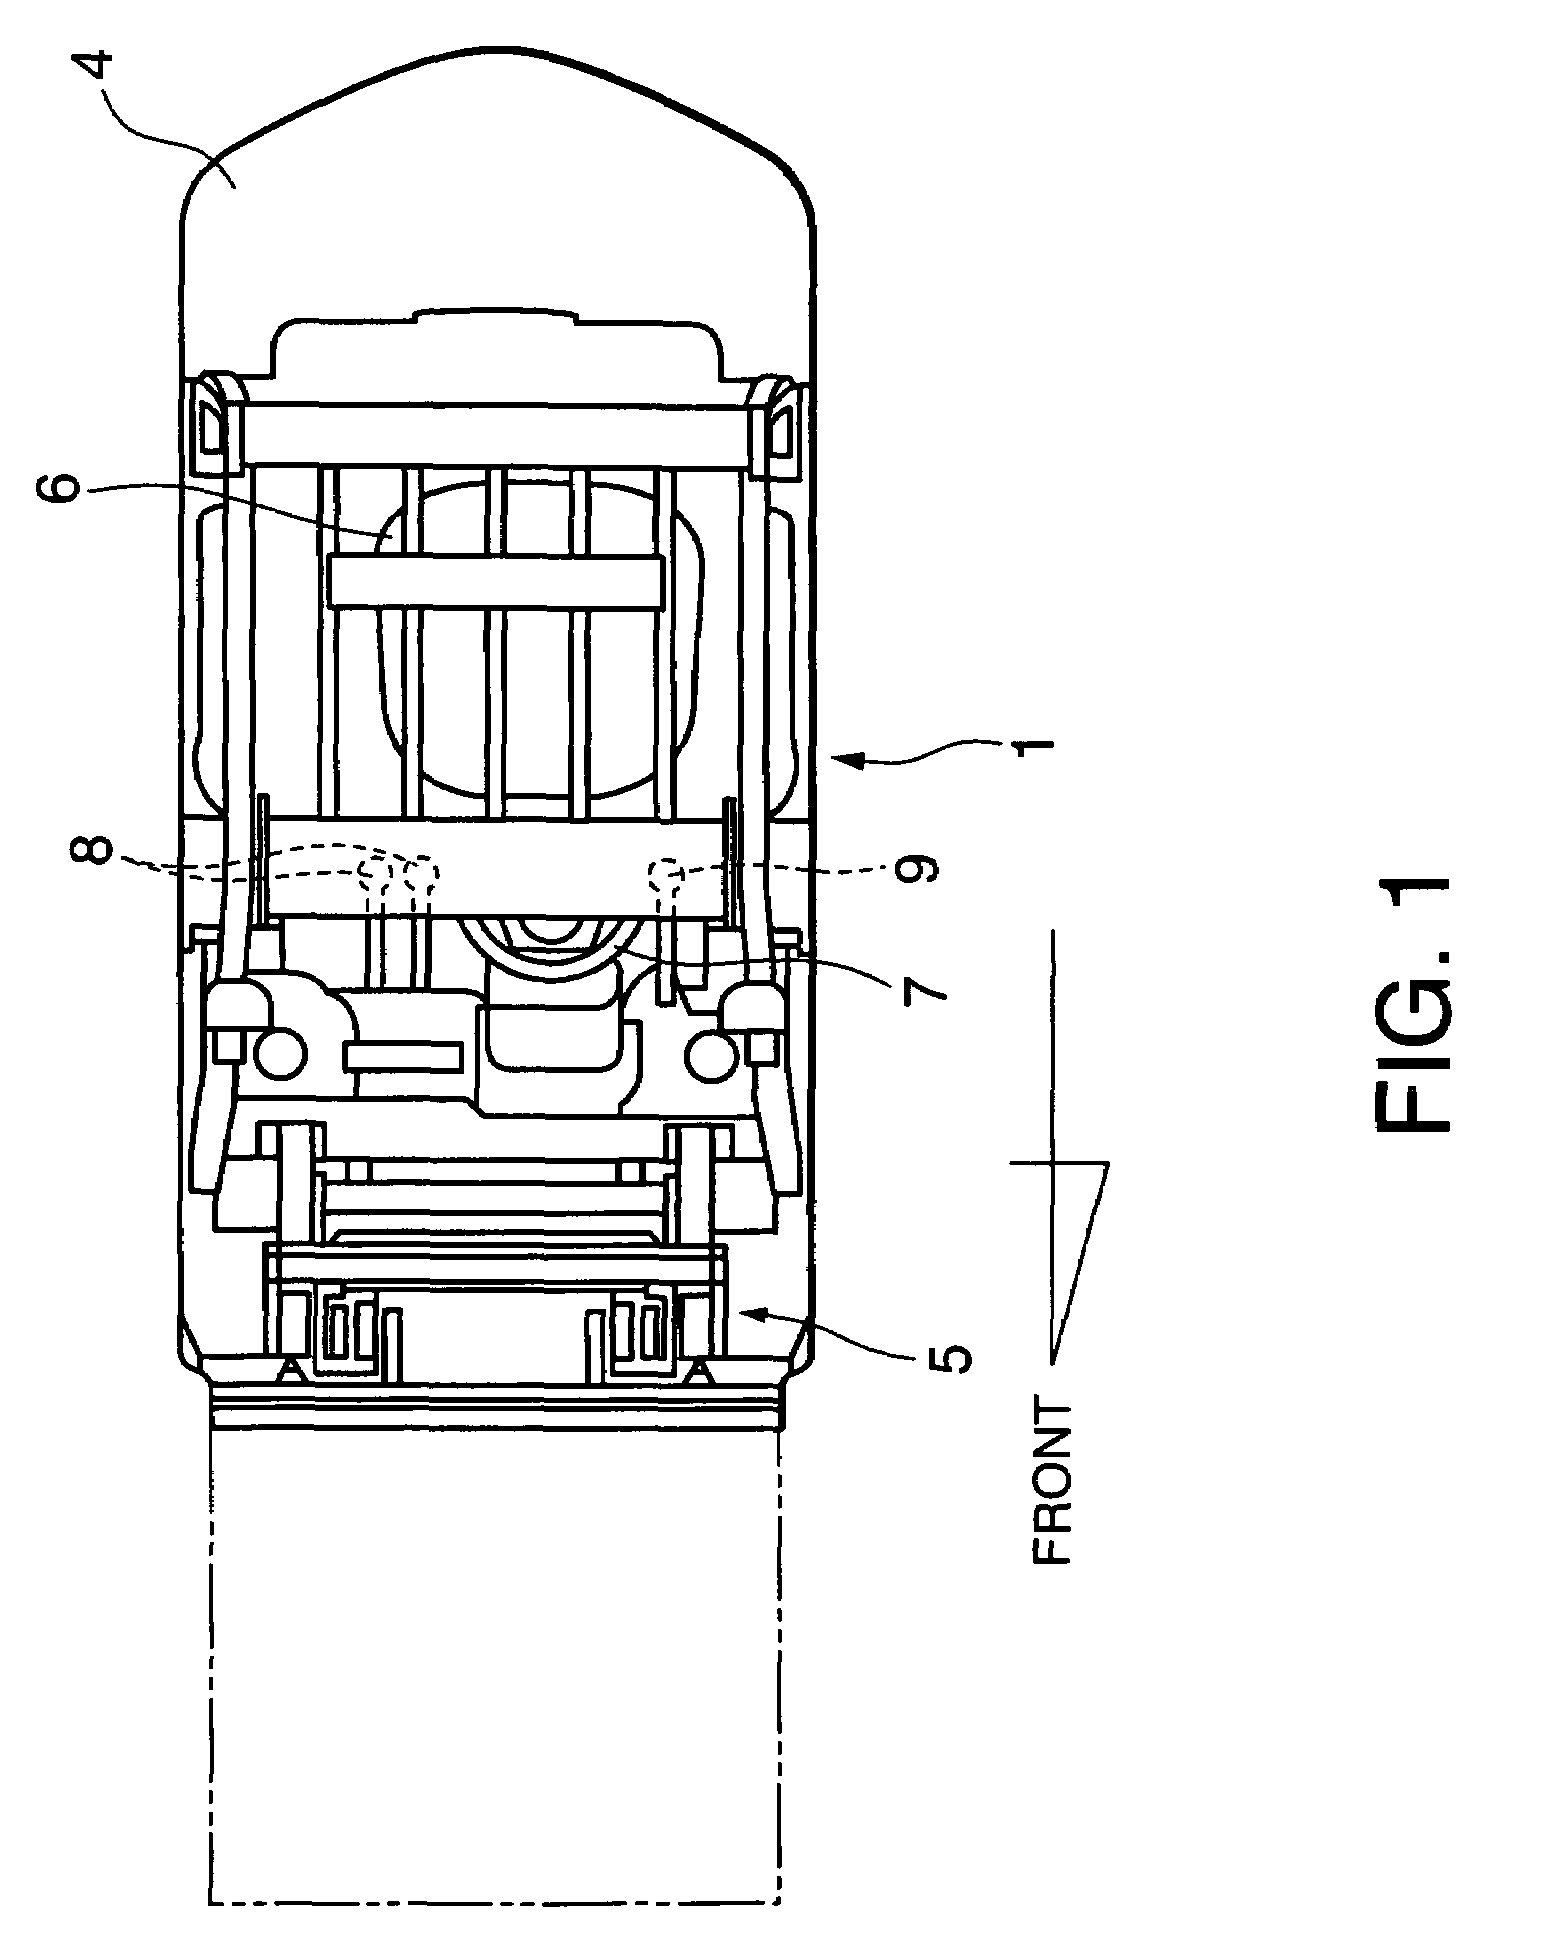 Hydraulic pressure supply control in industrial vehicle